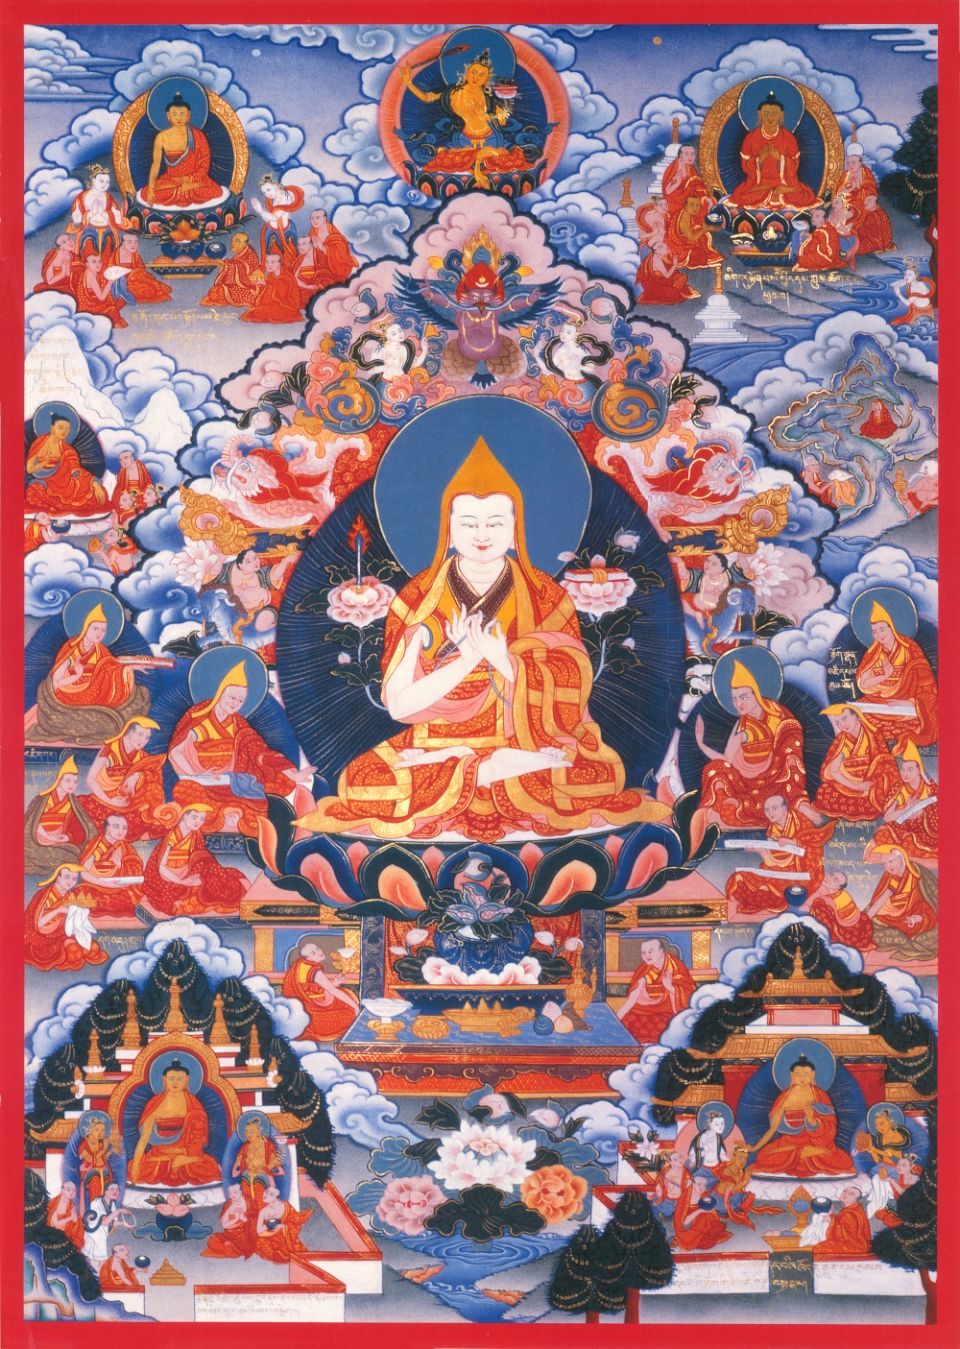 Rinpoche’s Recommendations for the 600th Anniversary of Lama Tsongkhapa’s Parinirvana on December 21